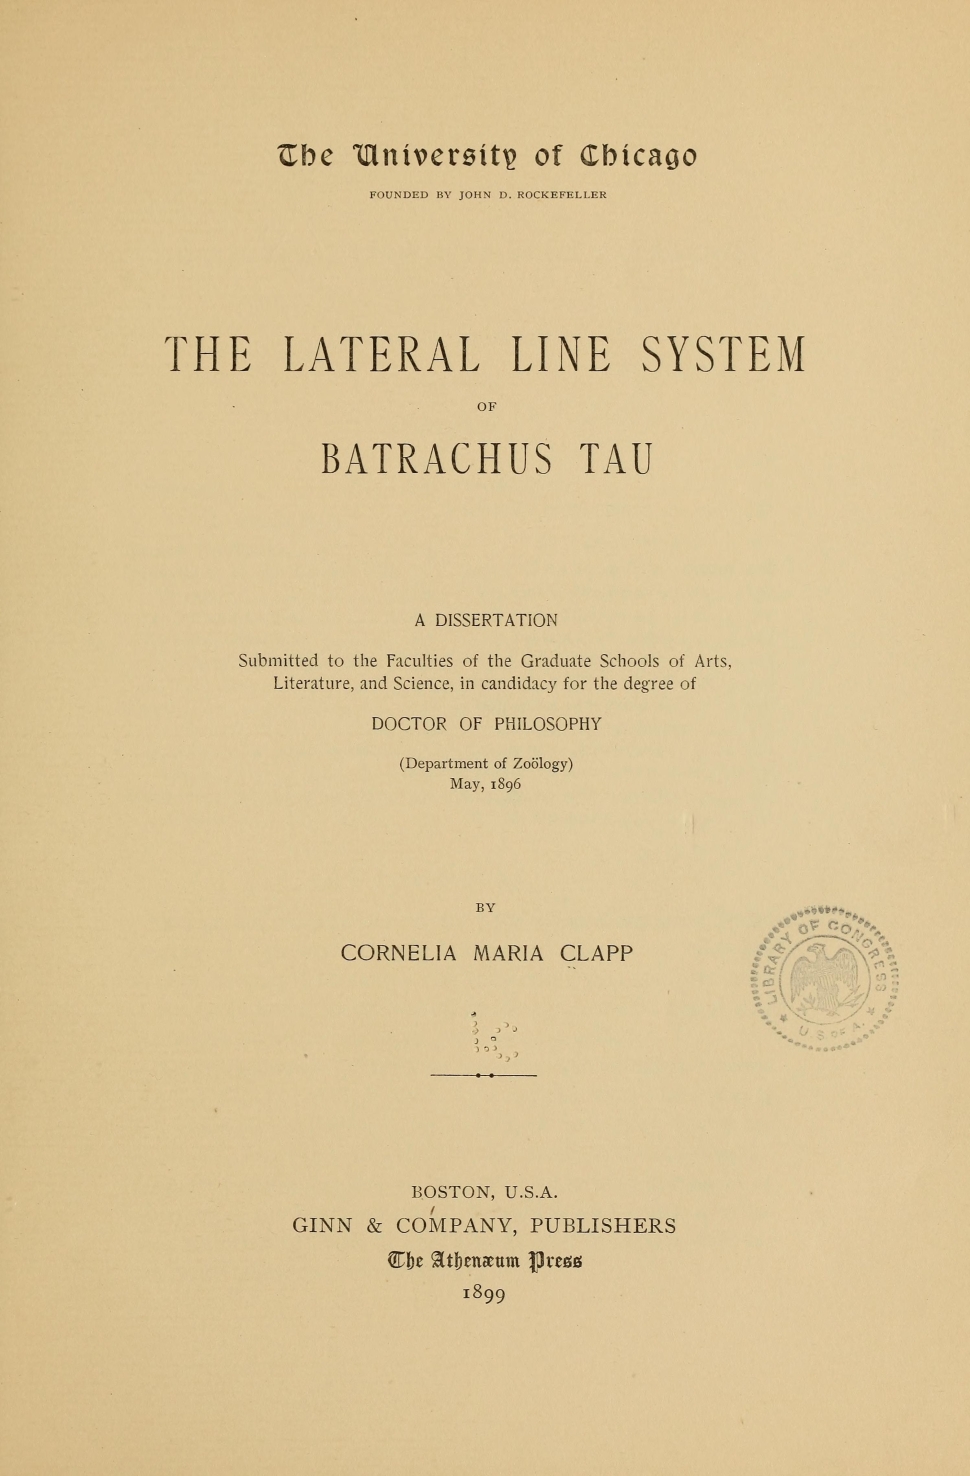 Clapp Dissertation "The Lateral Line System" in 1899